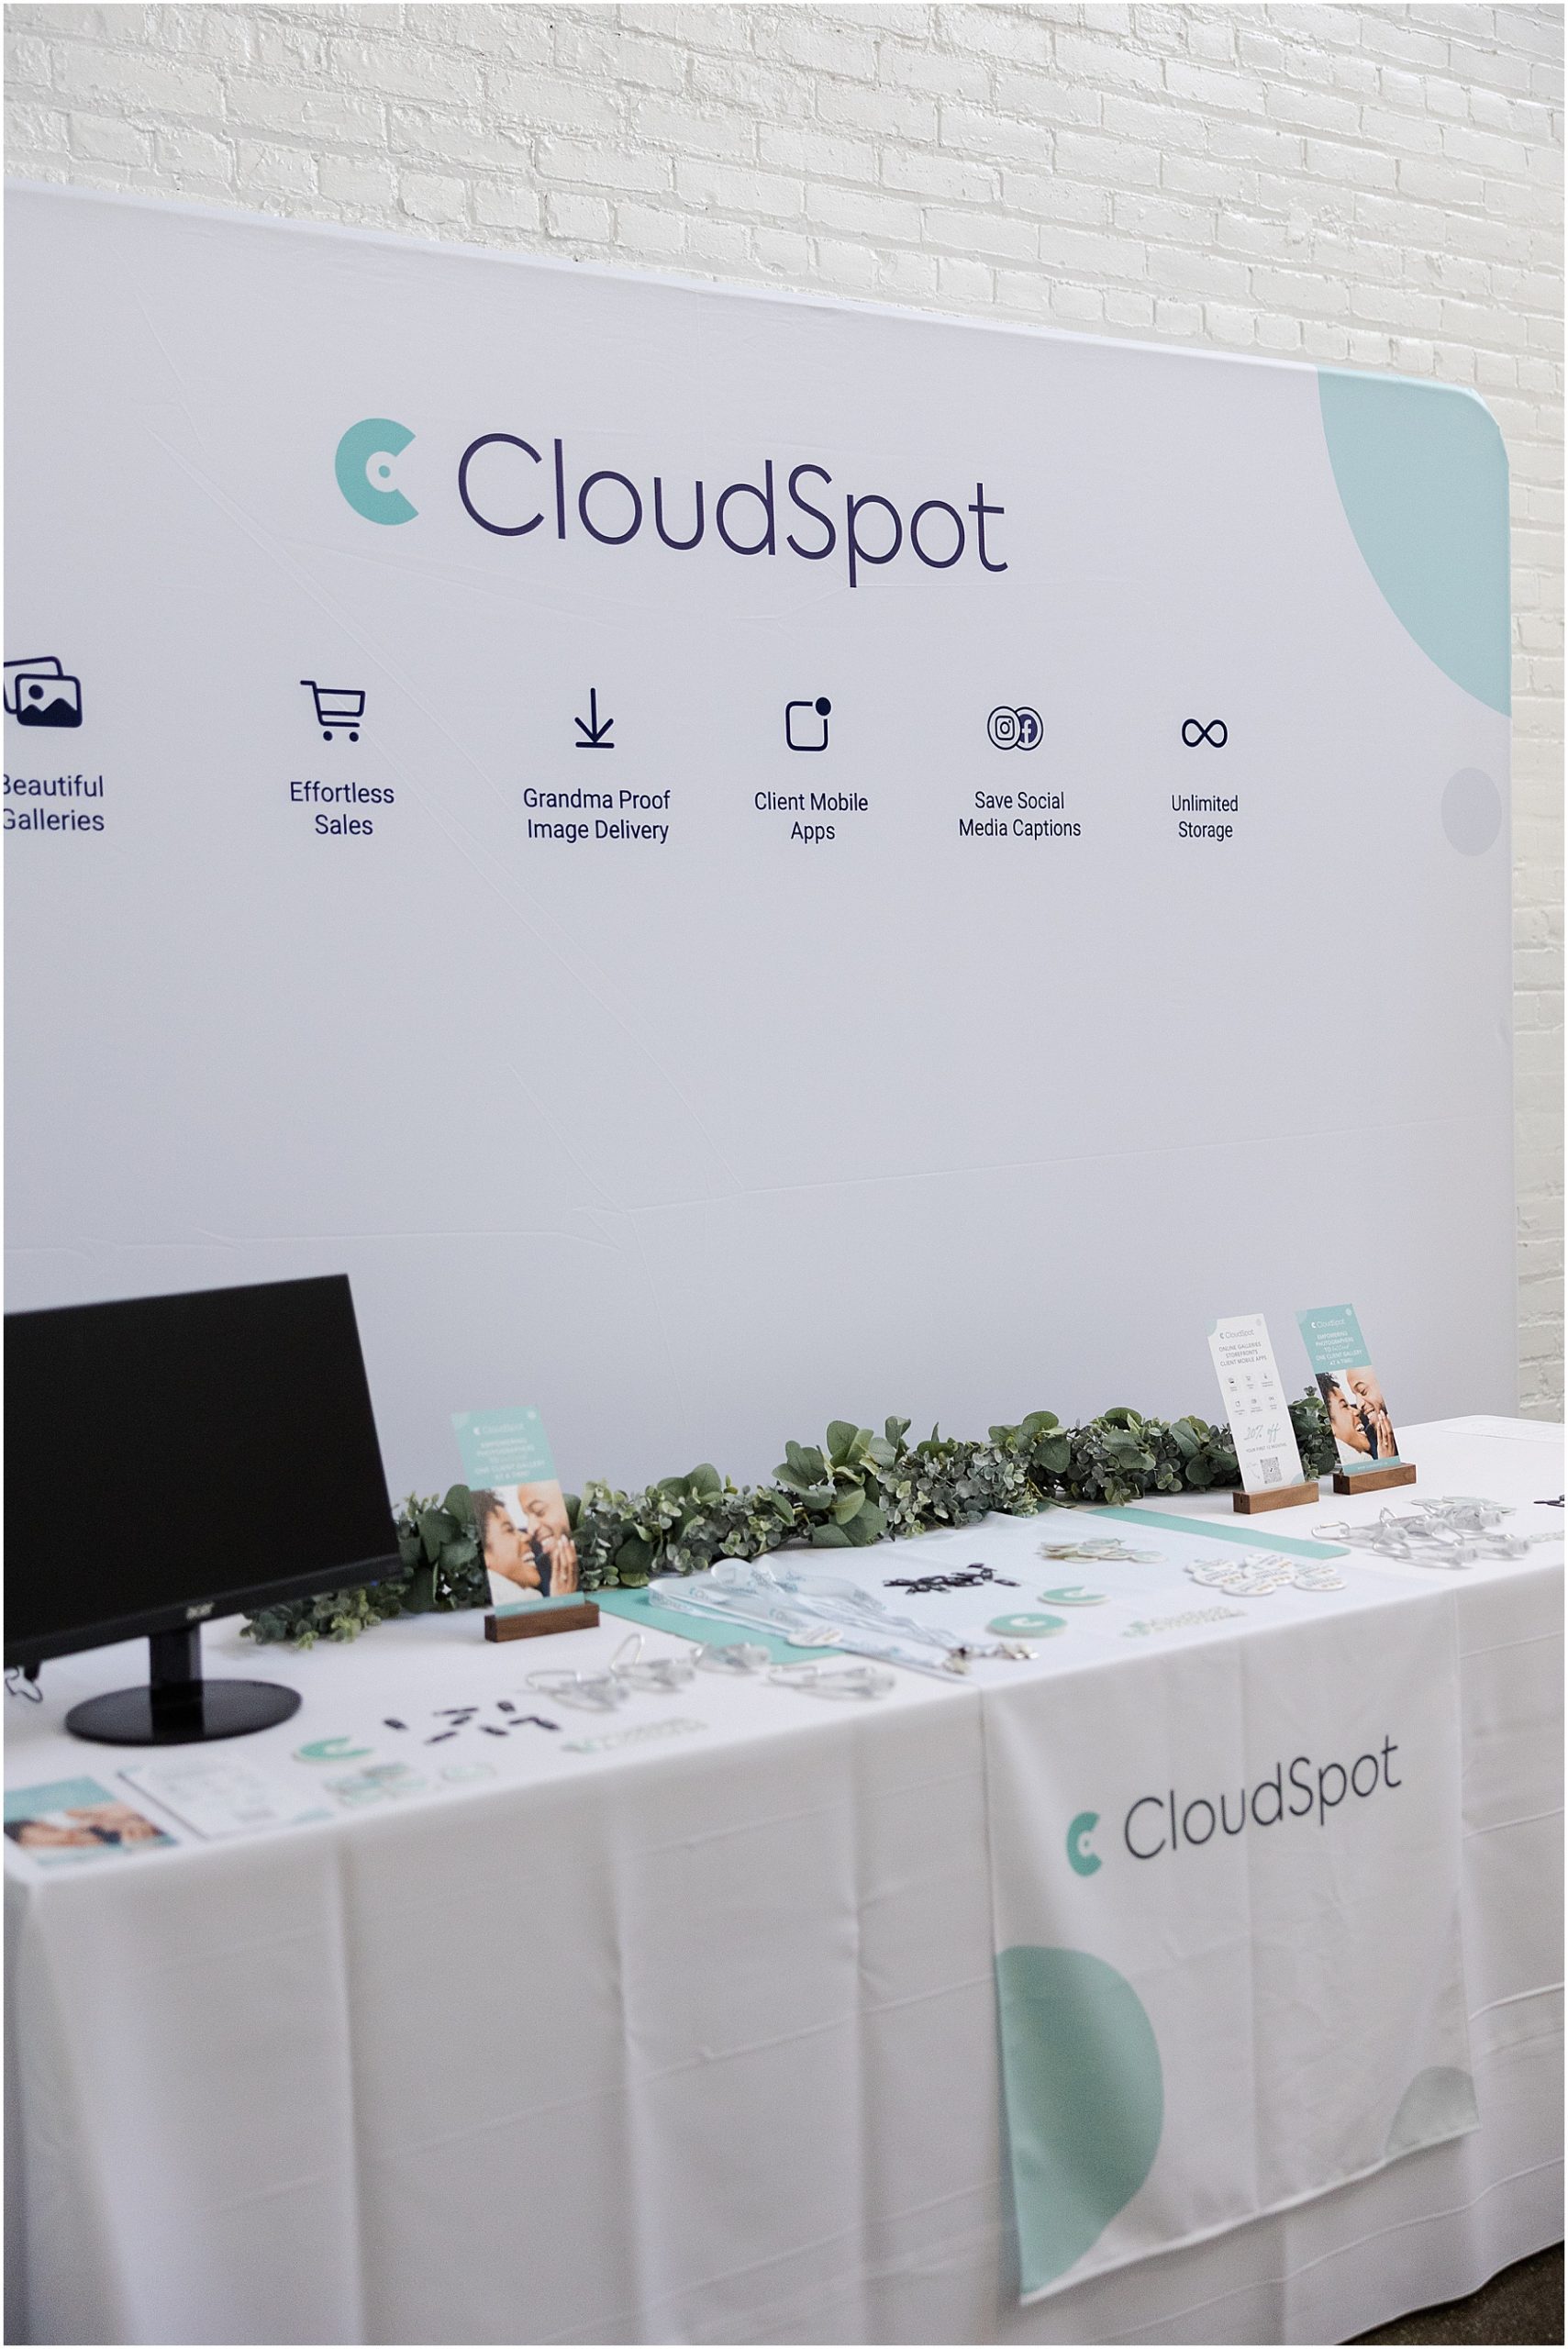 CloudSpot Sponsor at Photography Wedding Education Conference